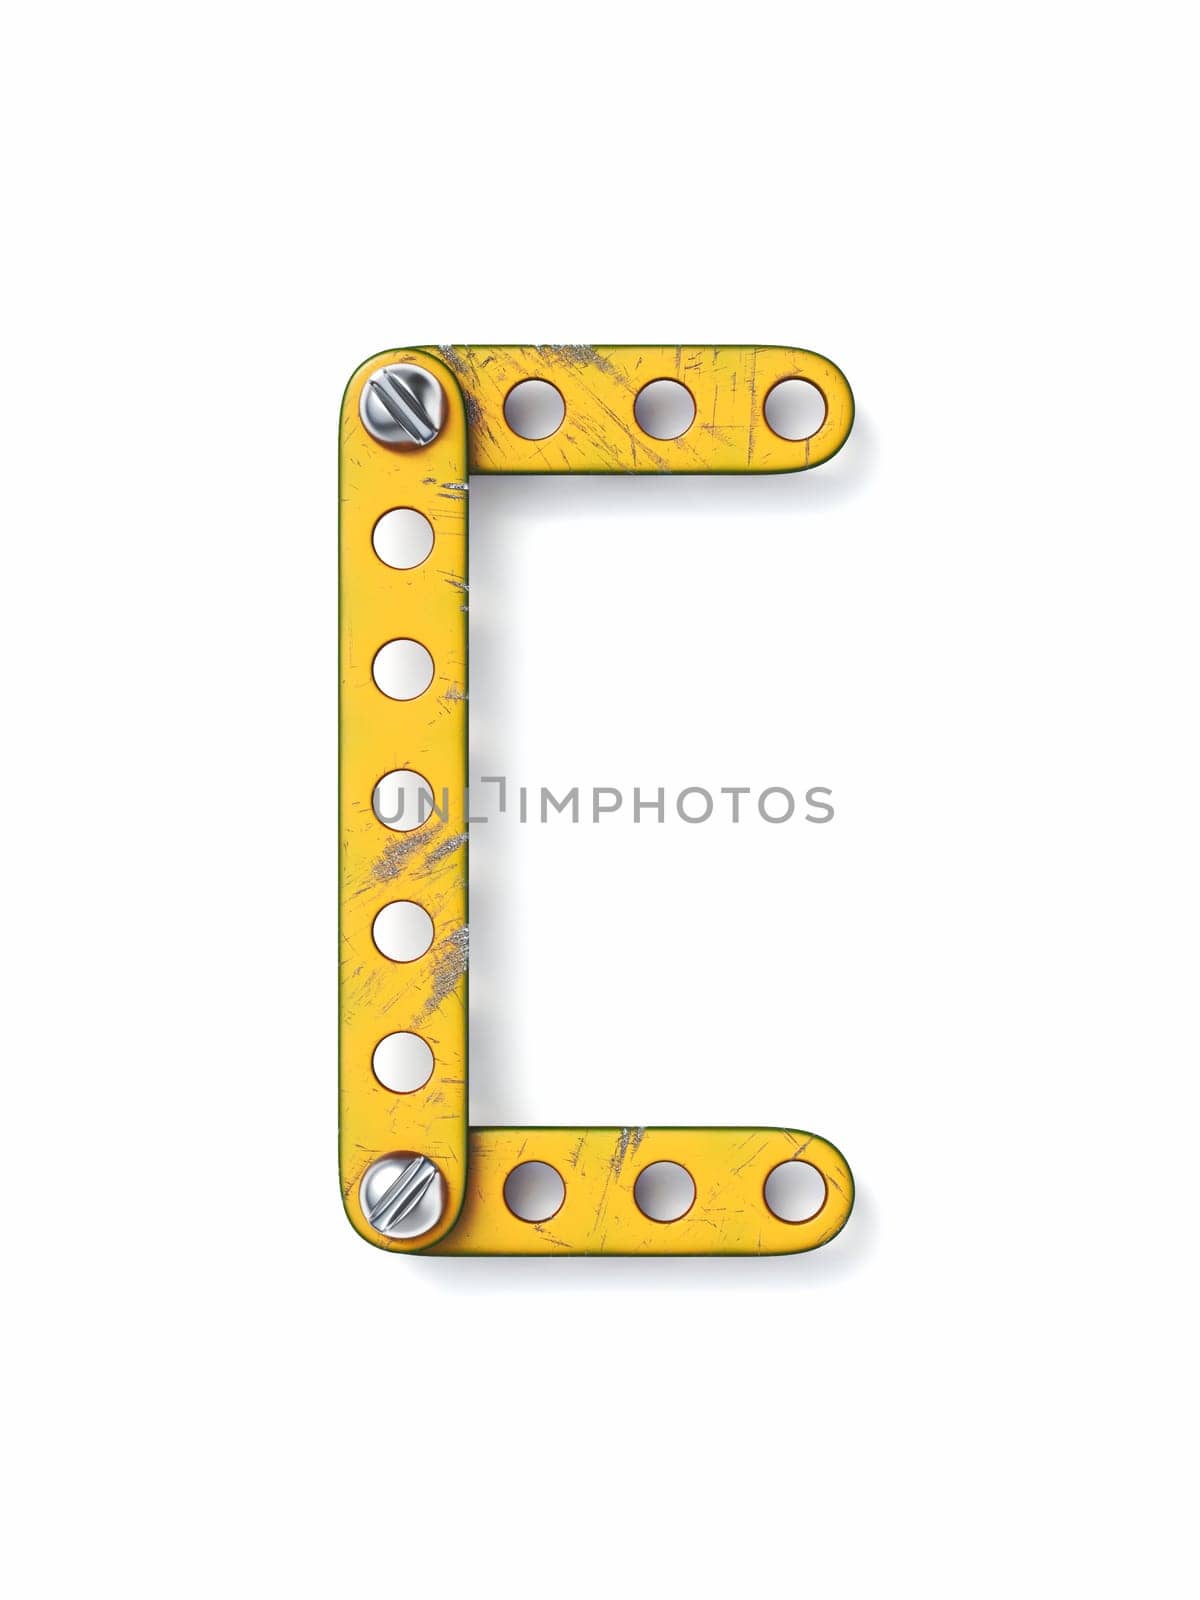 Aged yellow constructor font Letter C 3D rendering illustration isolated on white background